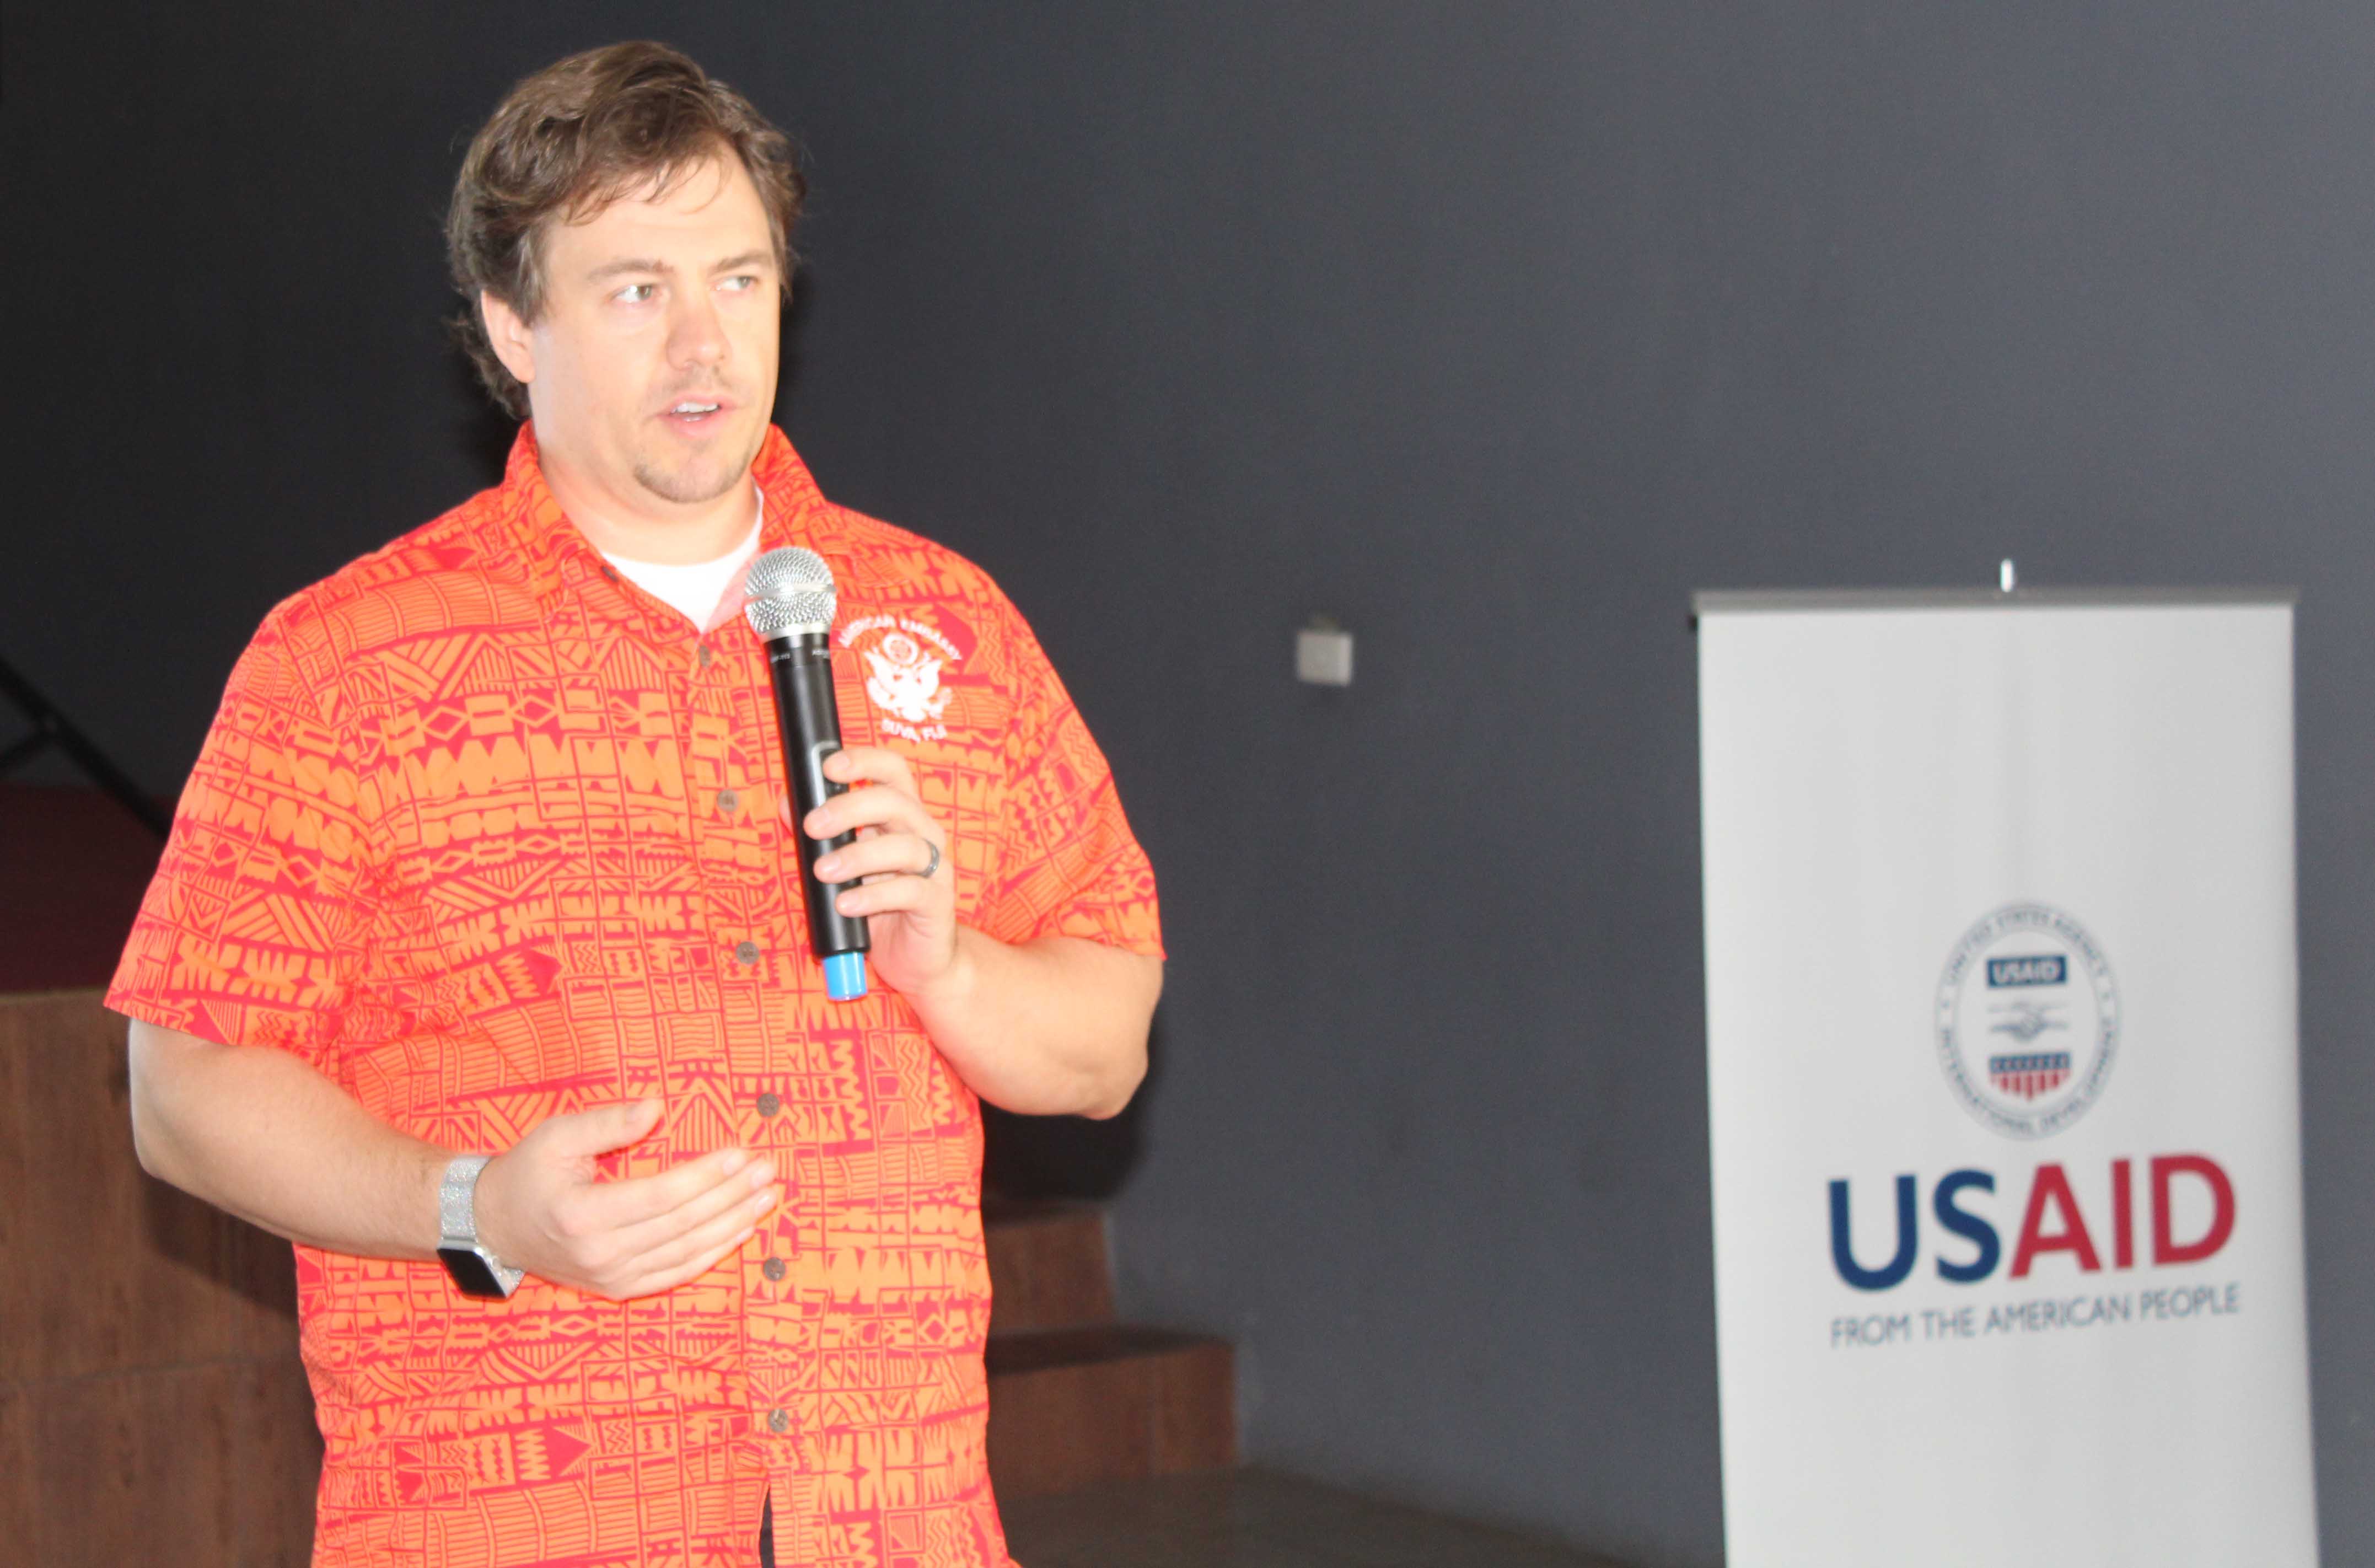 USAID Ready Project Supports Local Businesses to Become Disaster Resilient